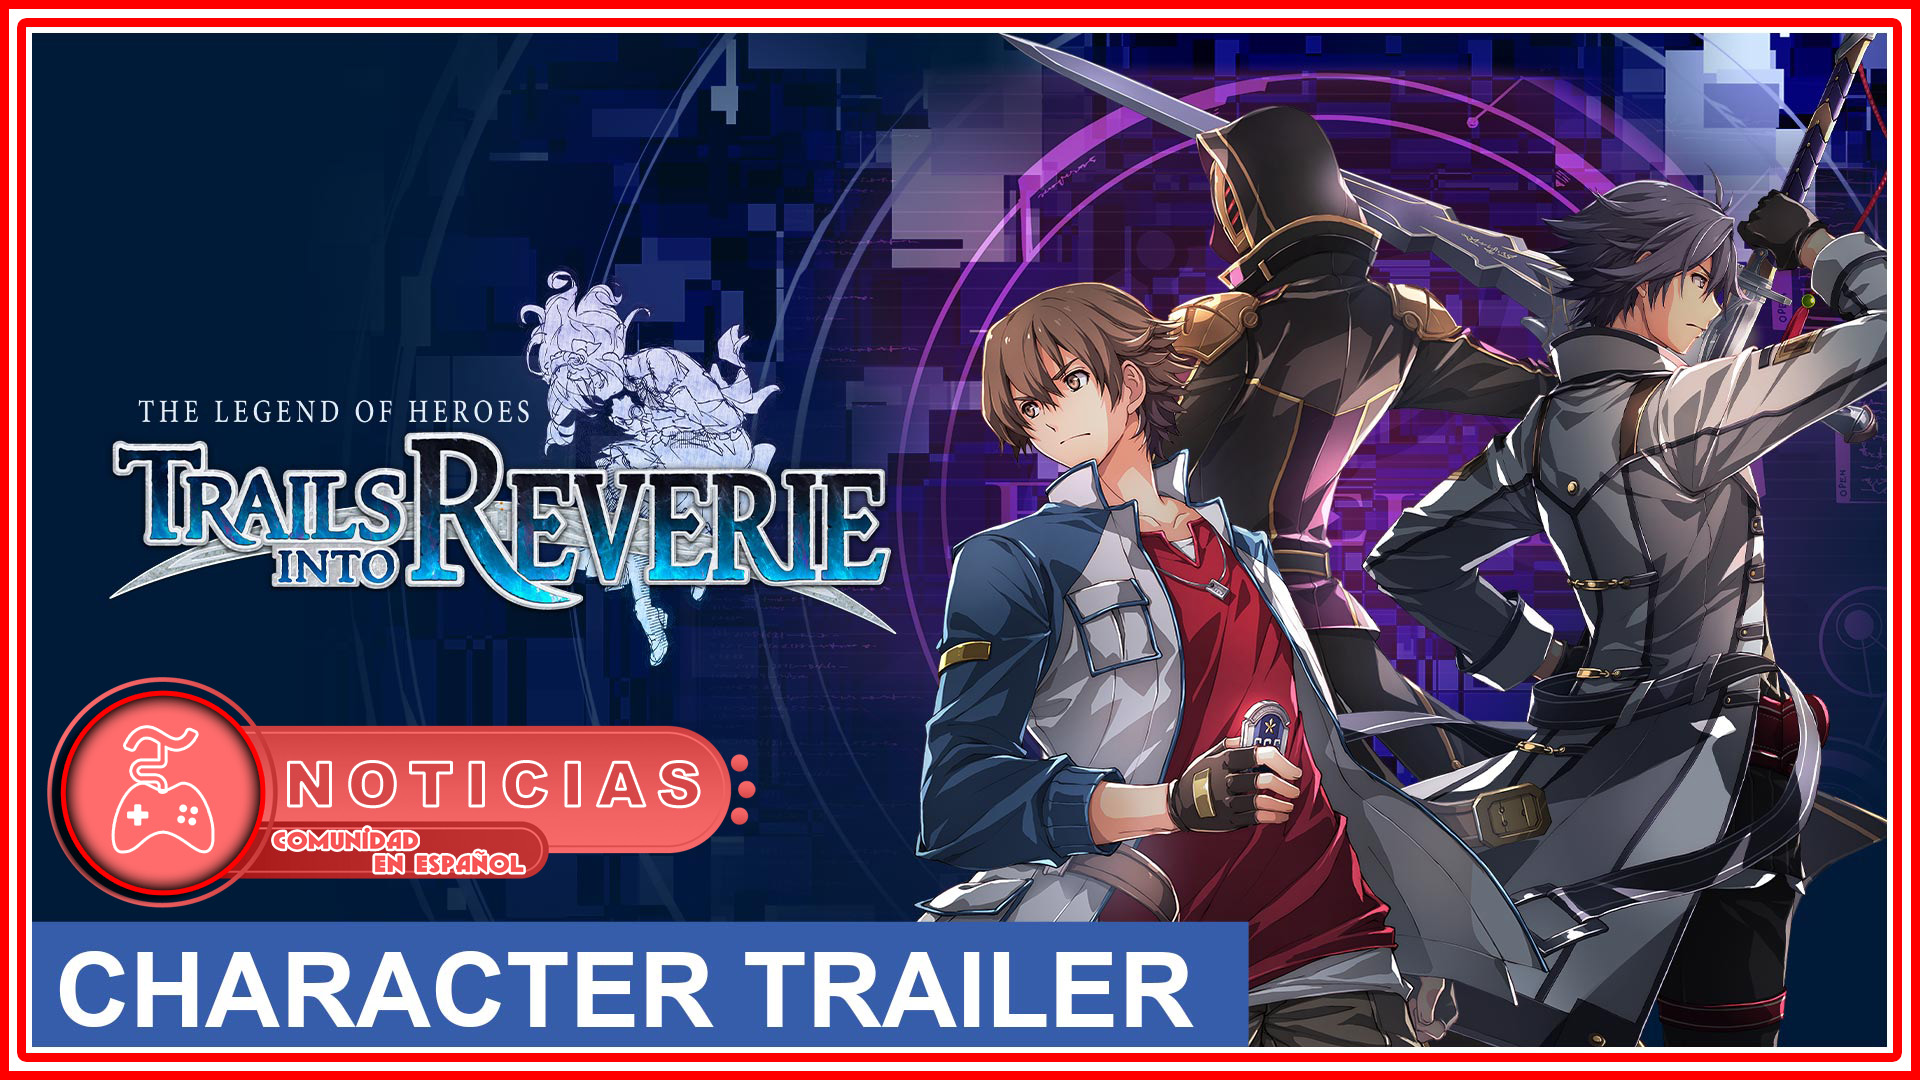 The Legend of Heroes: Trails into Reverie - Noticias